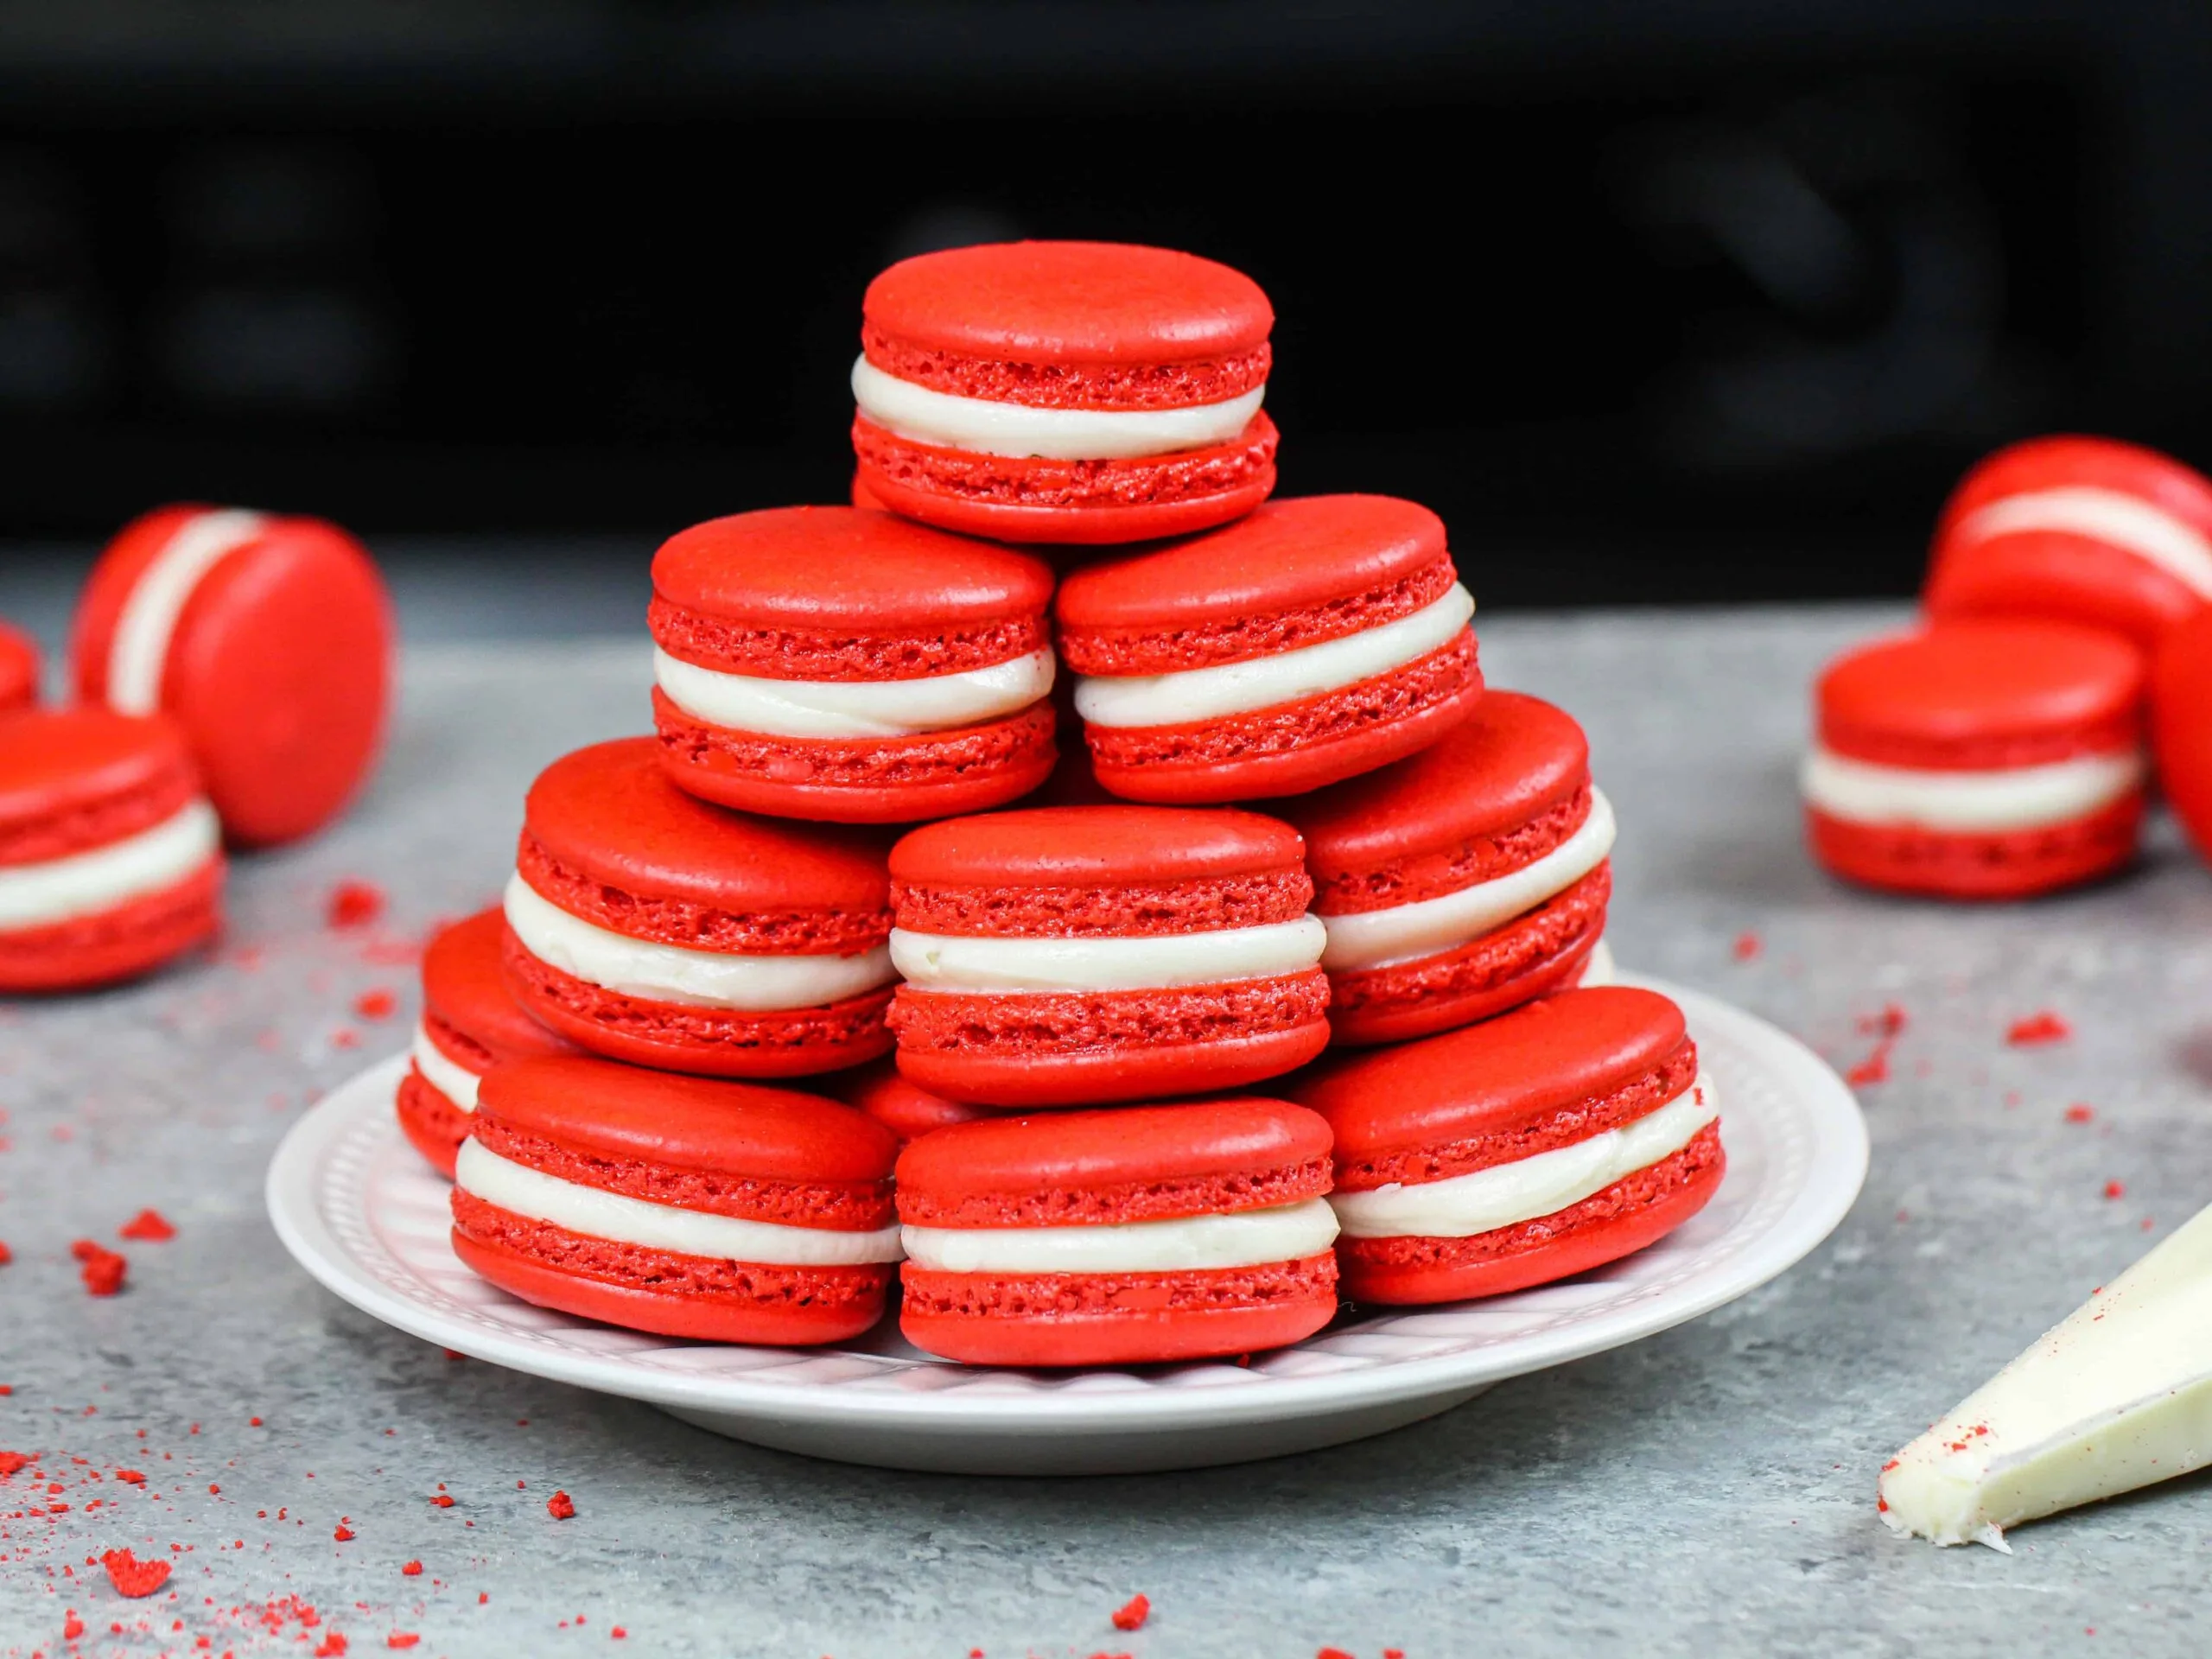 image of red velvet macarons stacked on a plate 